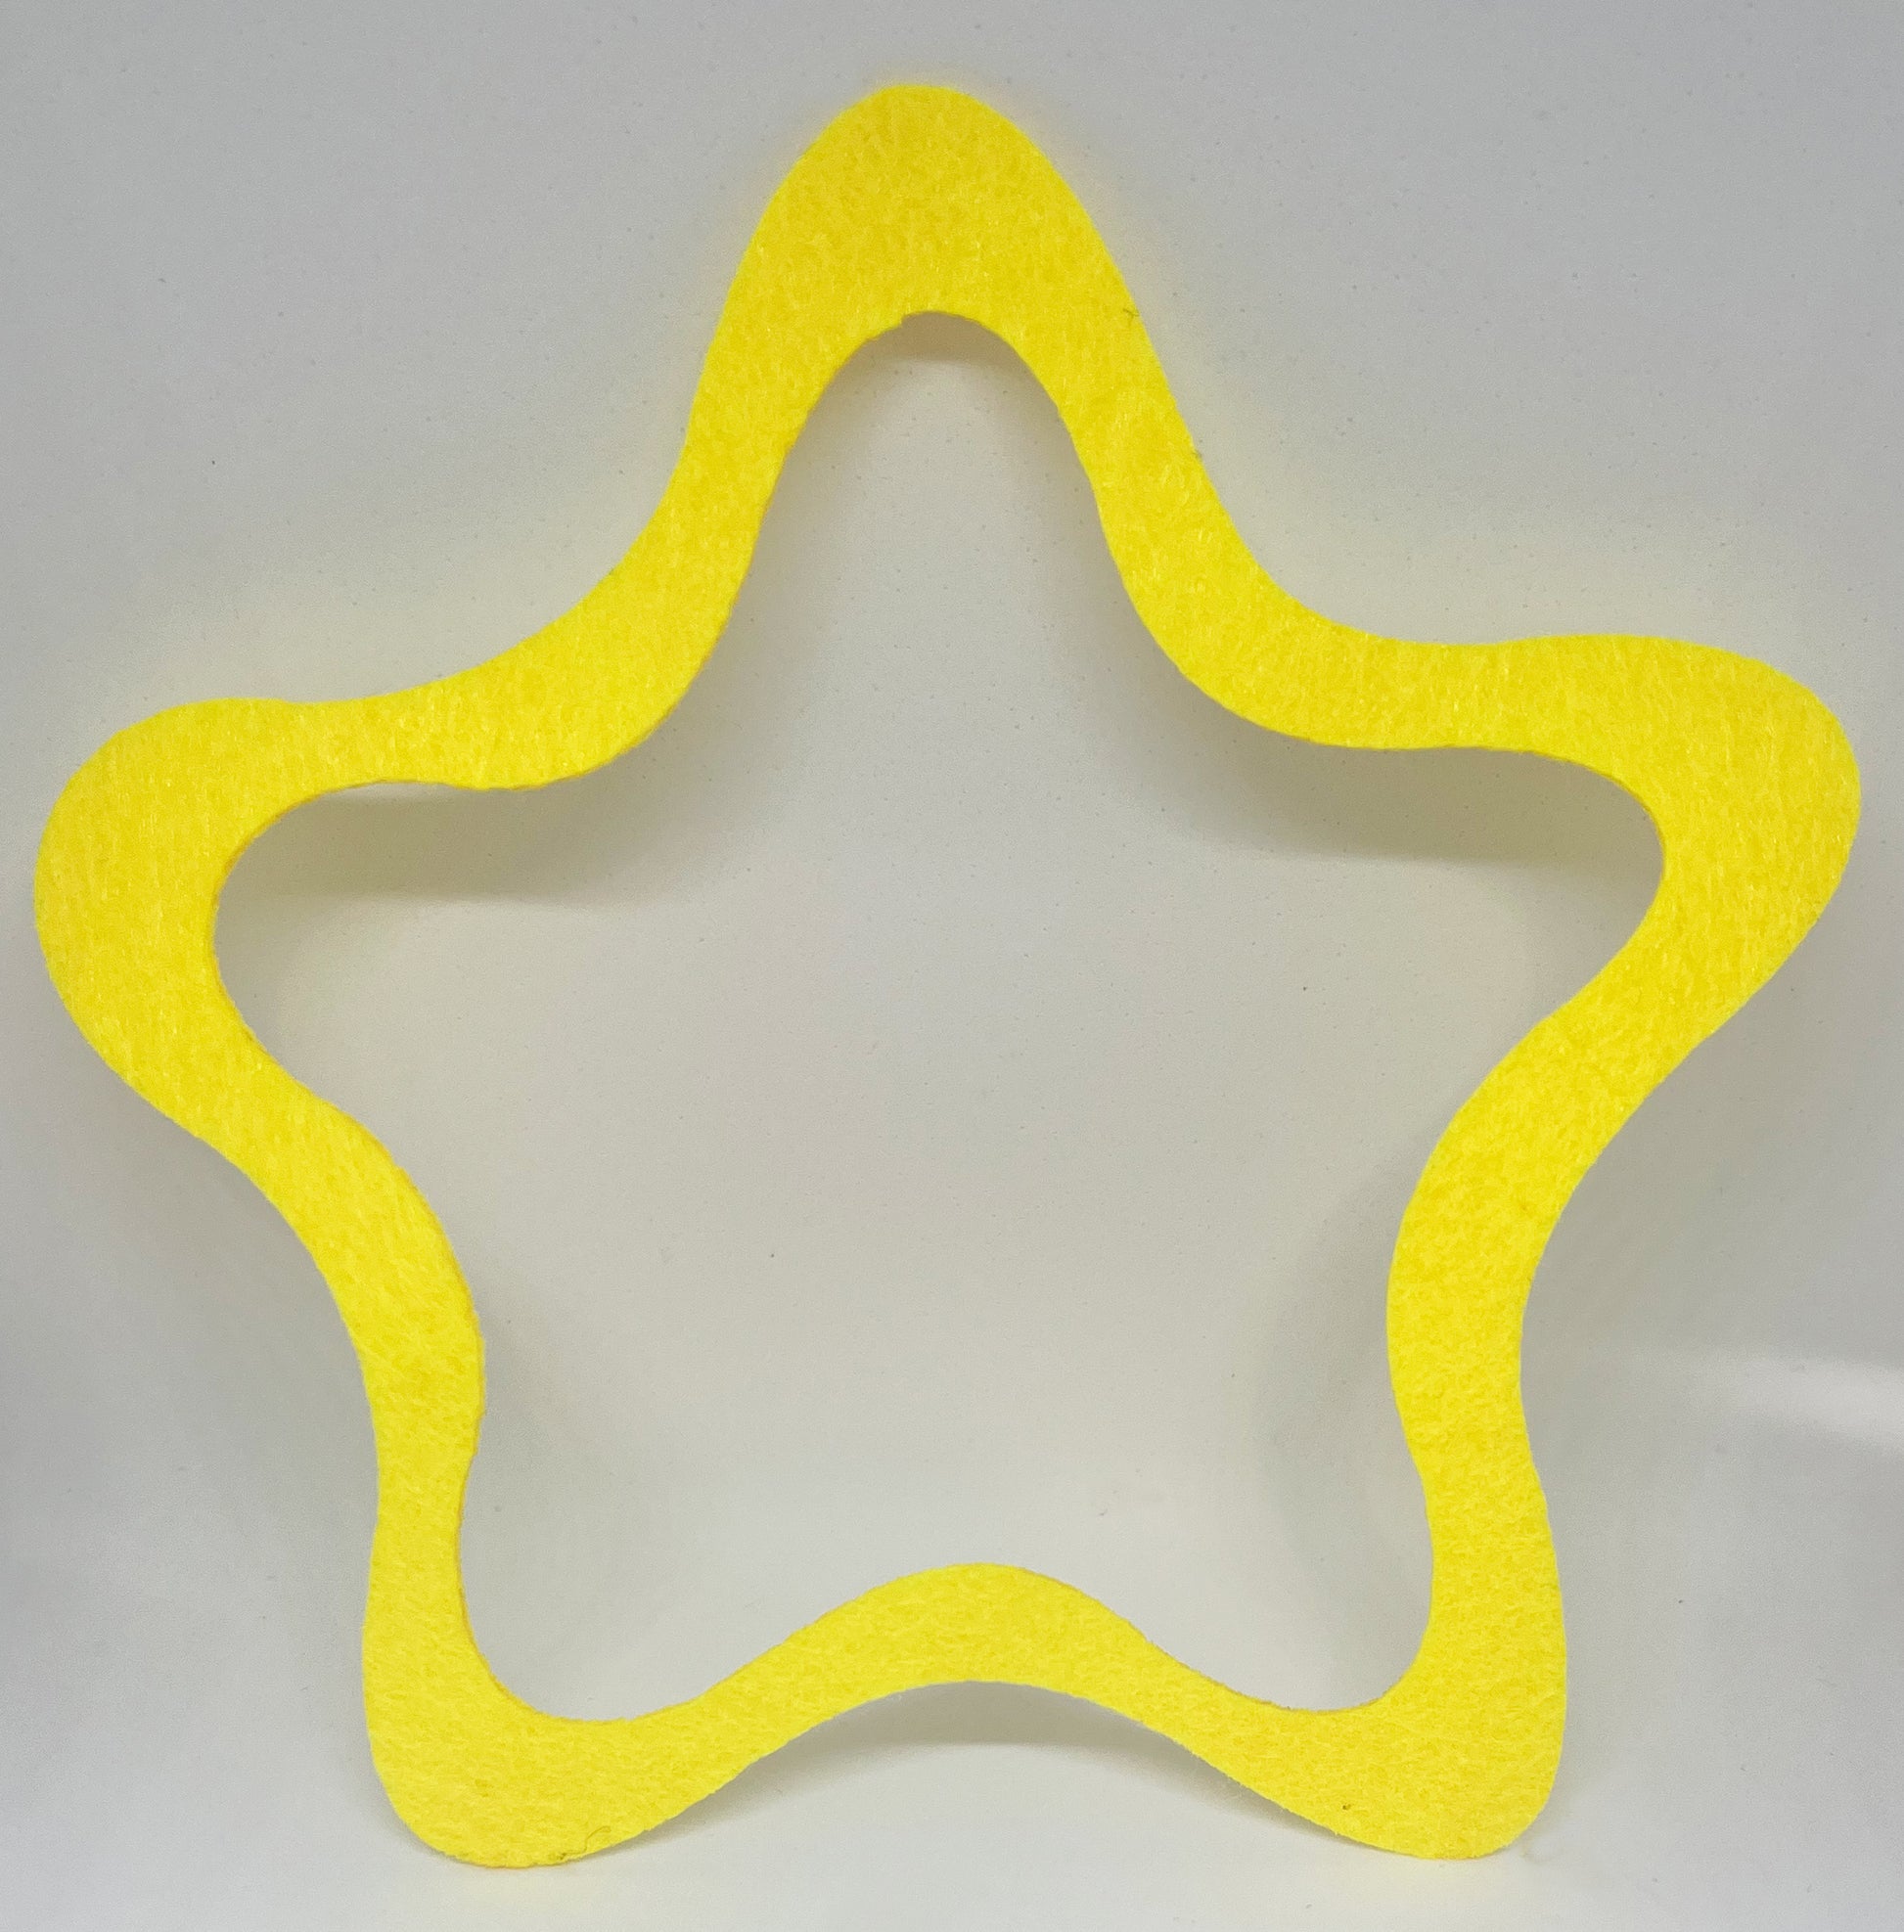 Our milestone markers are made of a soft yellow felt and are versatile and easy to use. Simply place the marker next to your baby in photos to indicate their age or use them as props in other milestone moments. When you're done, store them safely in the reusable storage bag for future use or as a keepsake to treasure for years to come. 5.5” H x 5.5” H